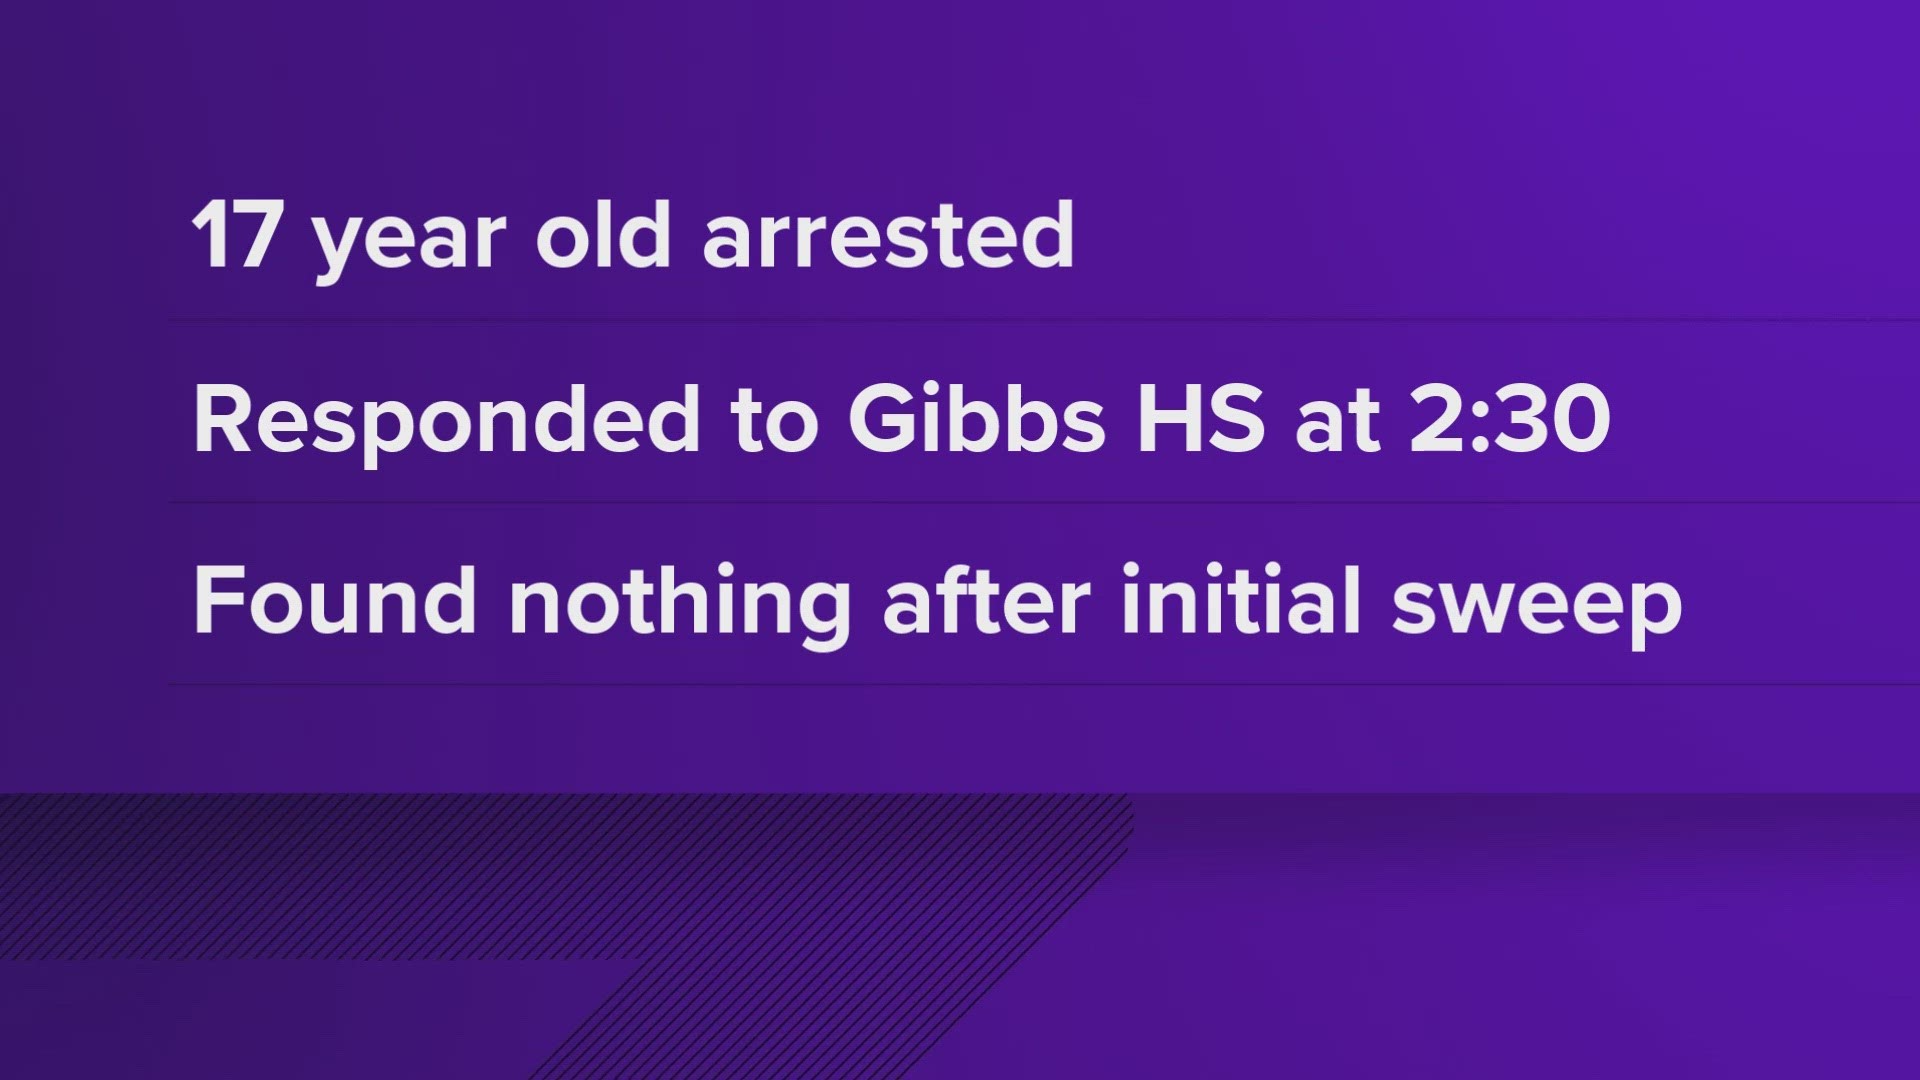 The Knox County Sherriff's Office Juvenile Crimes Unit is investigating a bomb threat at Gibbs High School, according to KCSO.